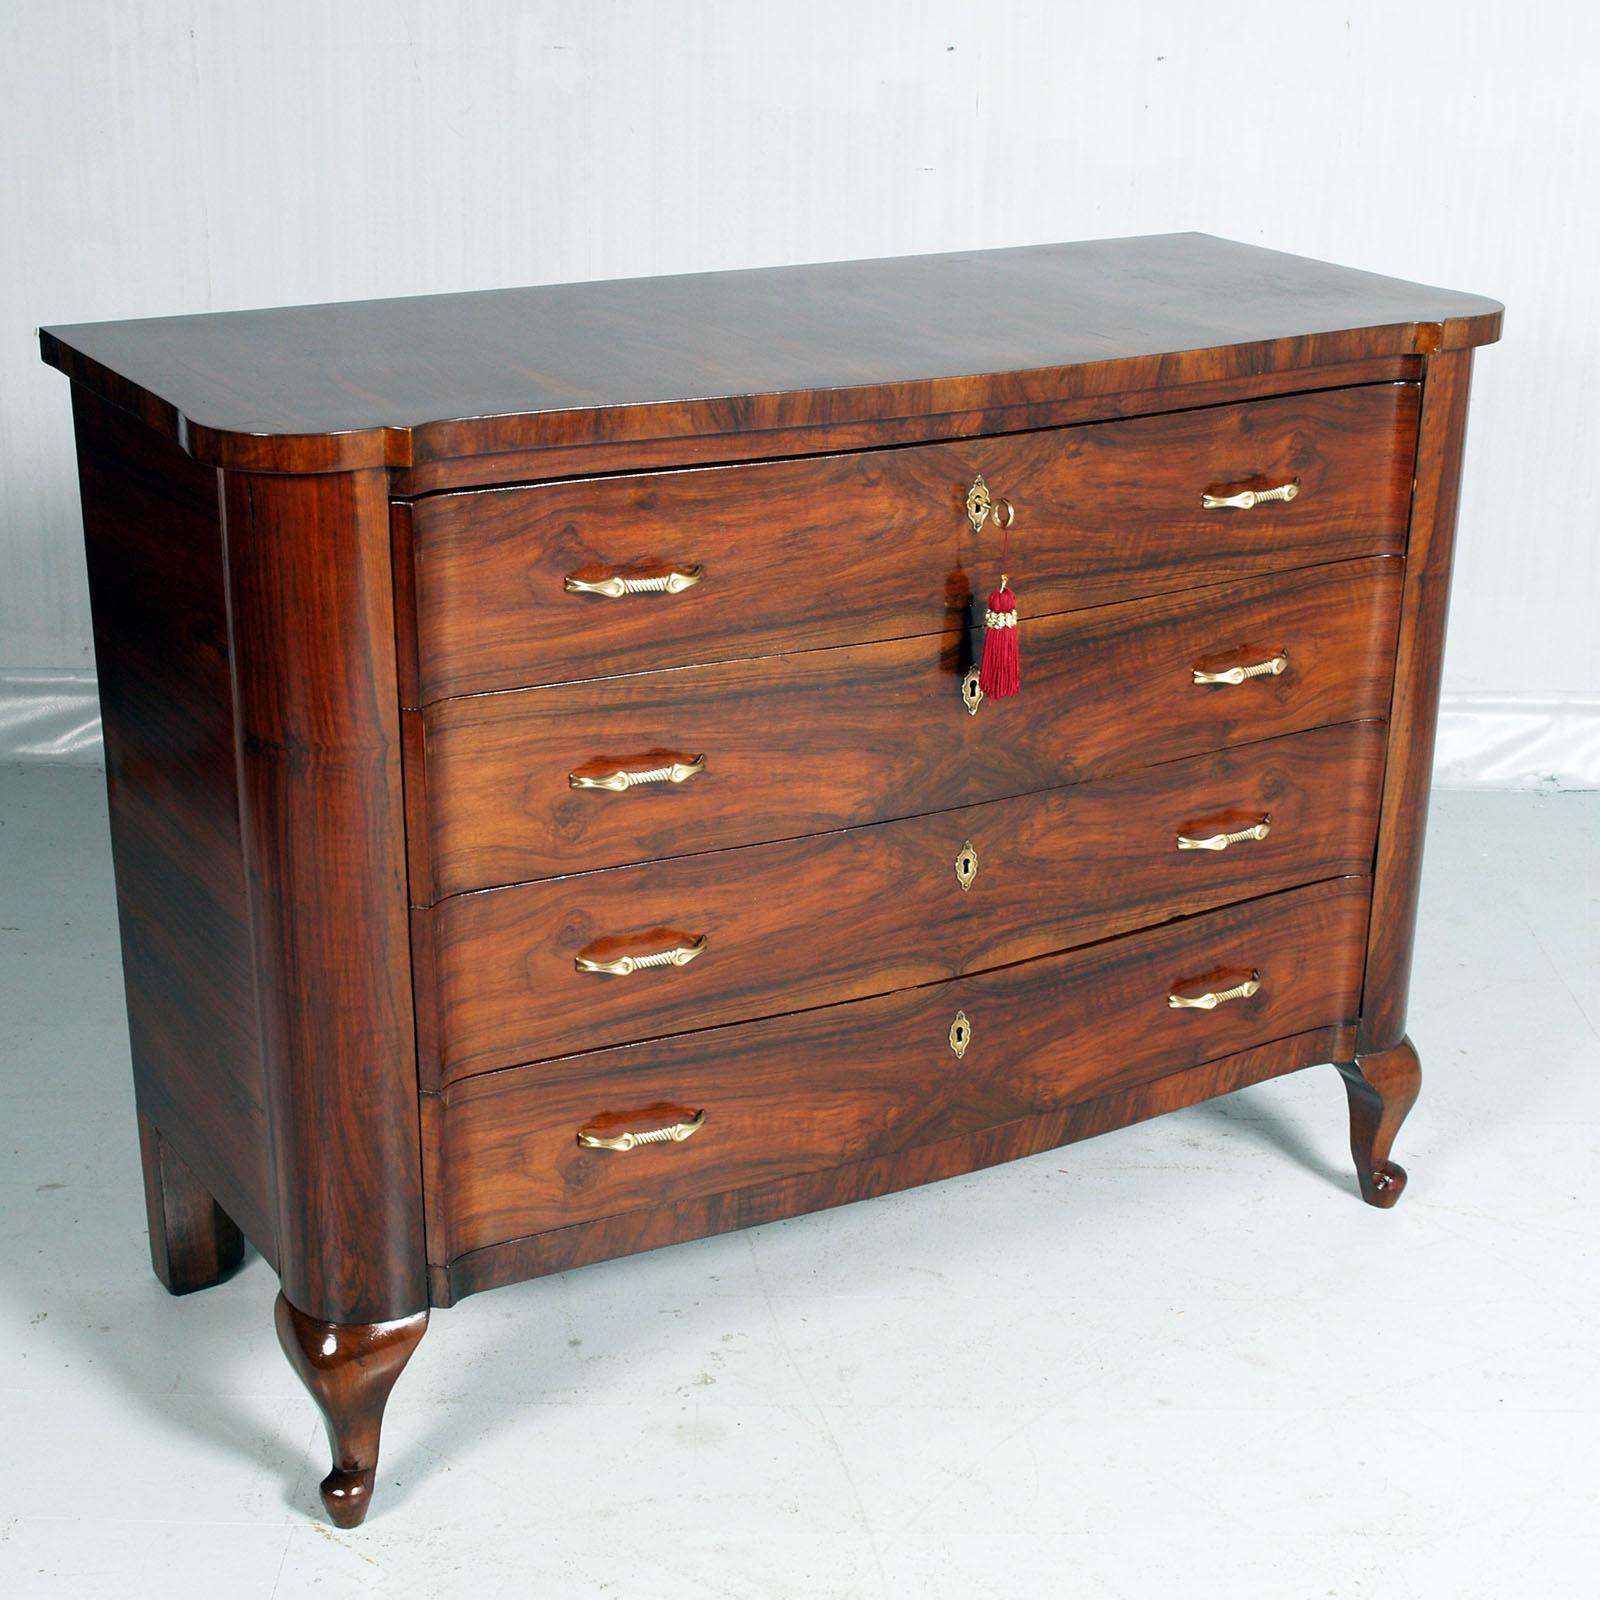 Elegant Venetian chest of drawers from the 1930s produced by Gaetano Borsani and attributed to the young Osvaldo Borsani, with shaped top and rounded shapes with 4 drawers, made of veneered walnut. Golden brass opening handles. Revised and wax